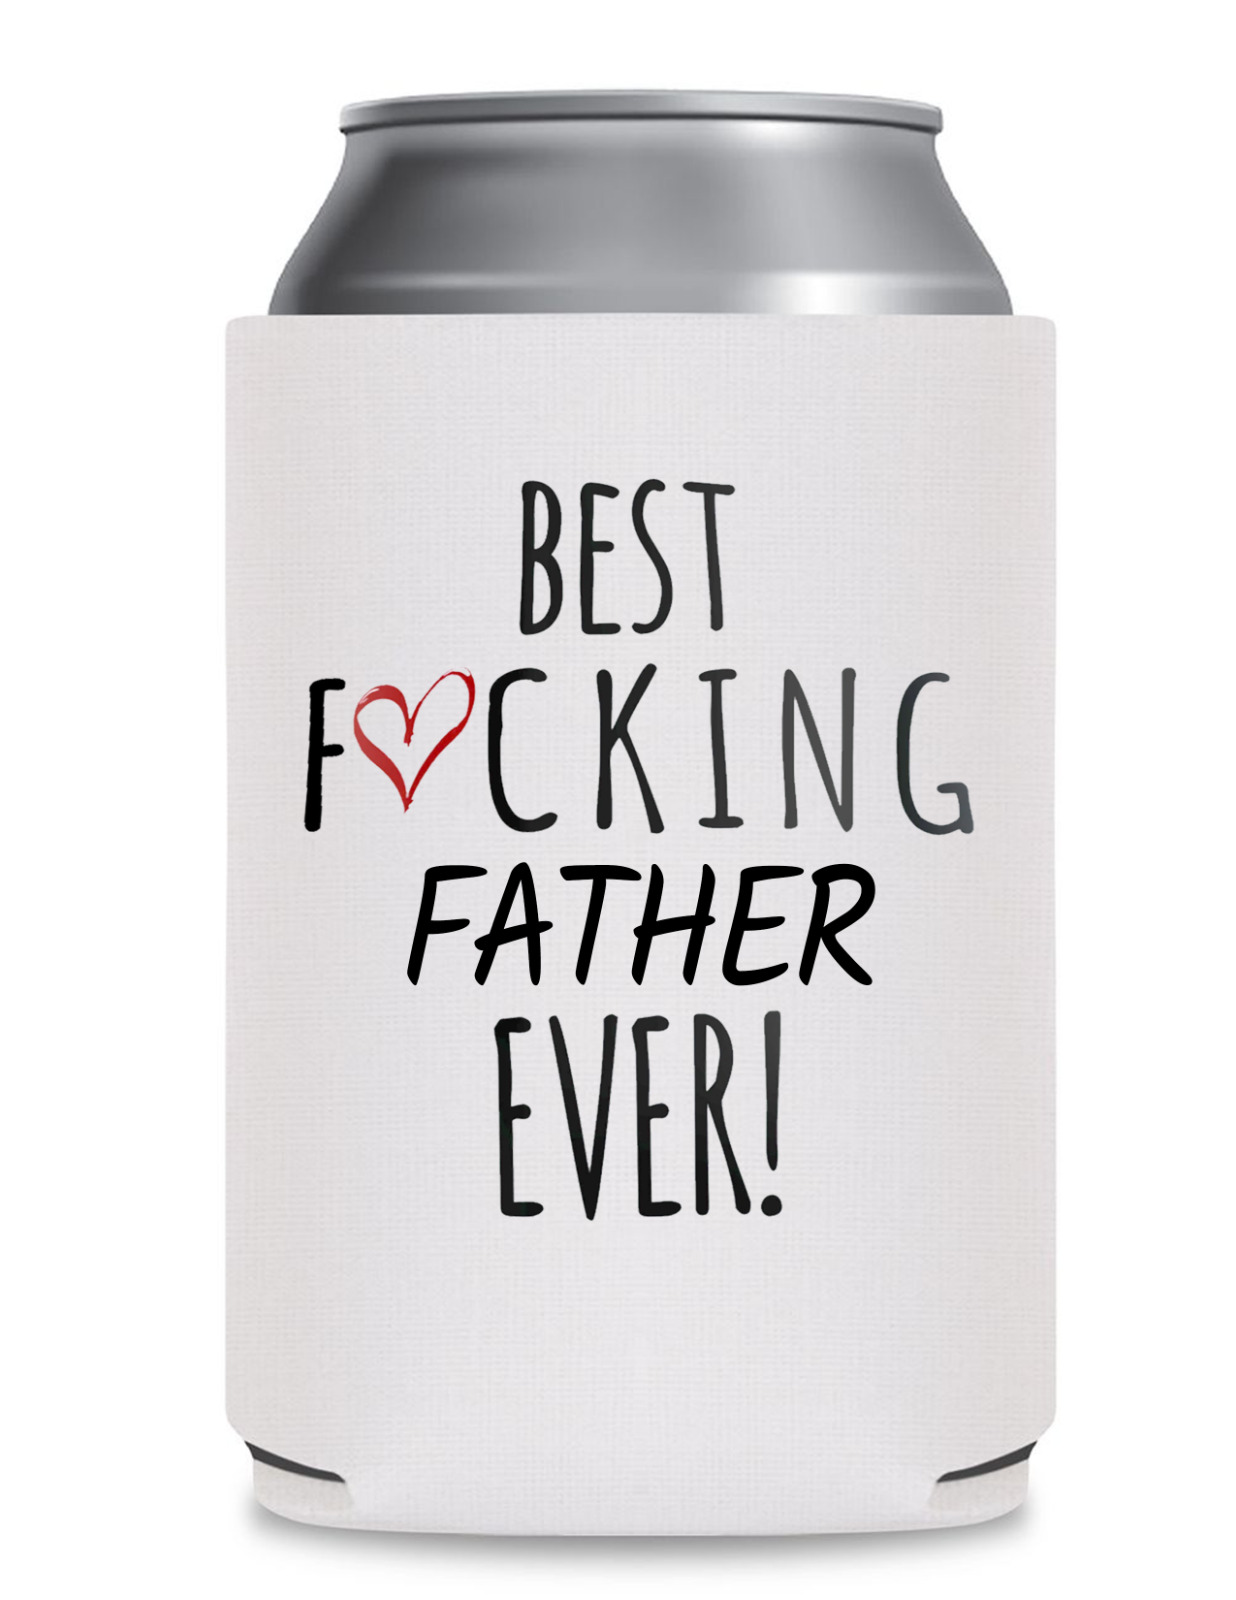 Best Fcking Dad Ever Koozie Coozie Fathers Gift Beer Drink Insulator Funny Gift